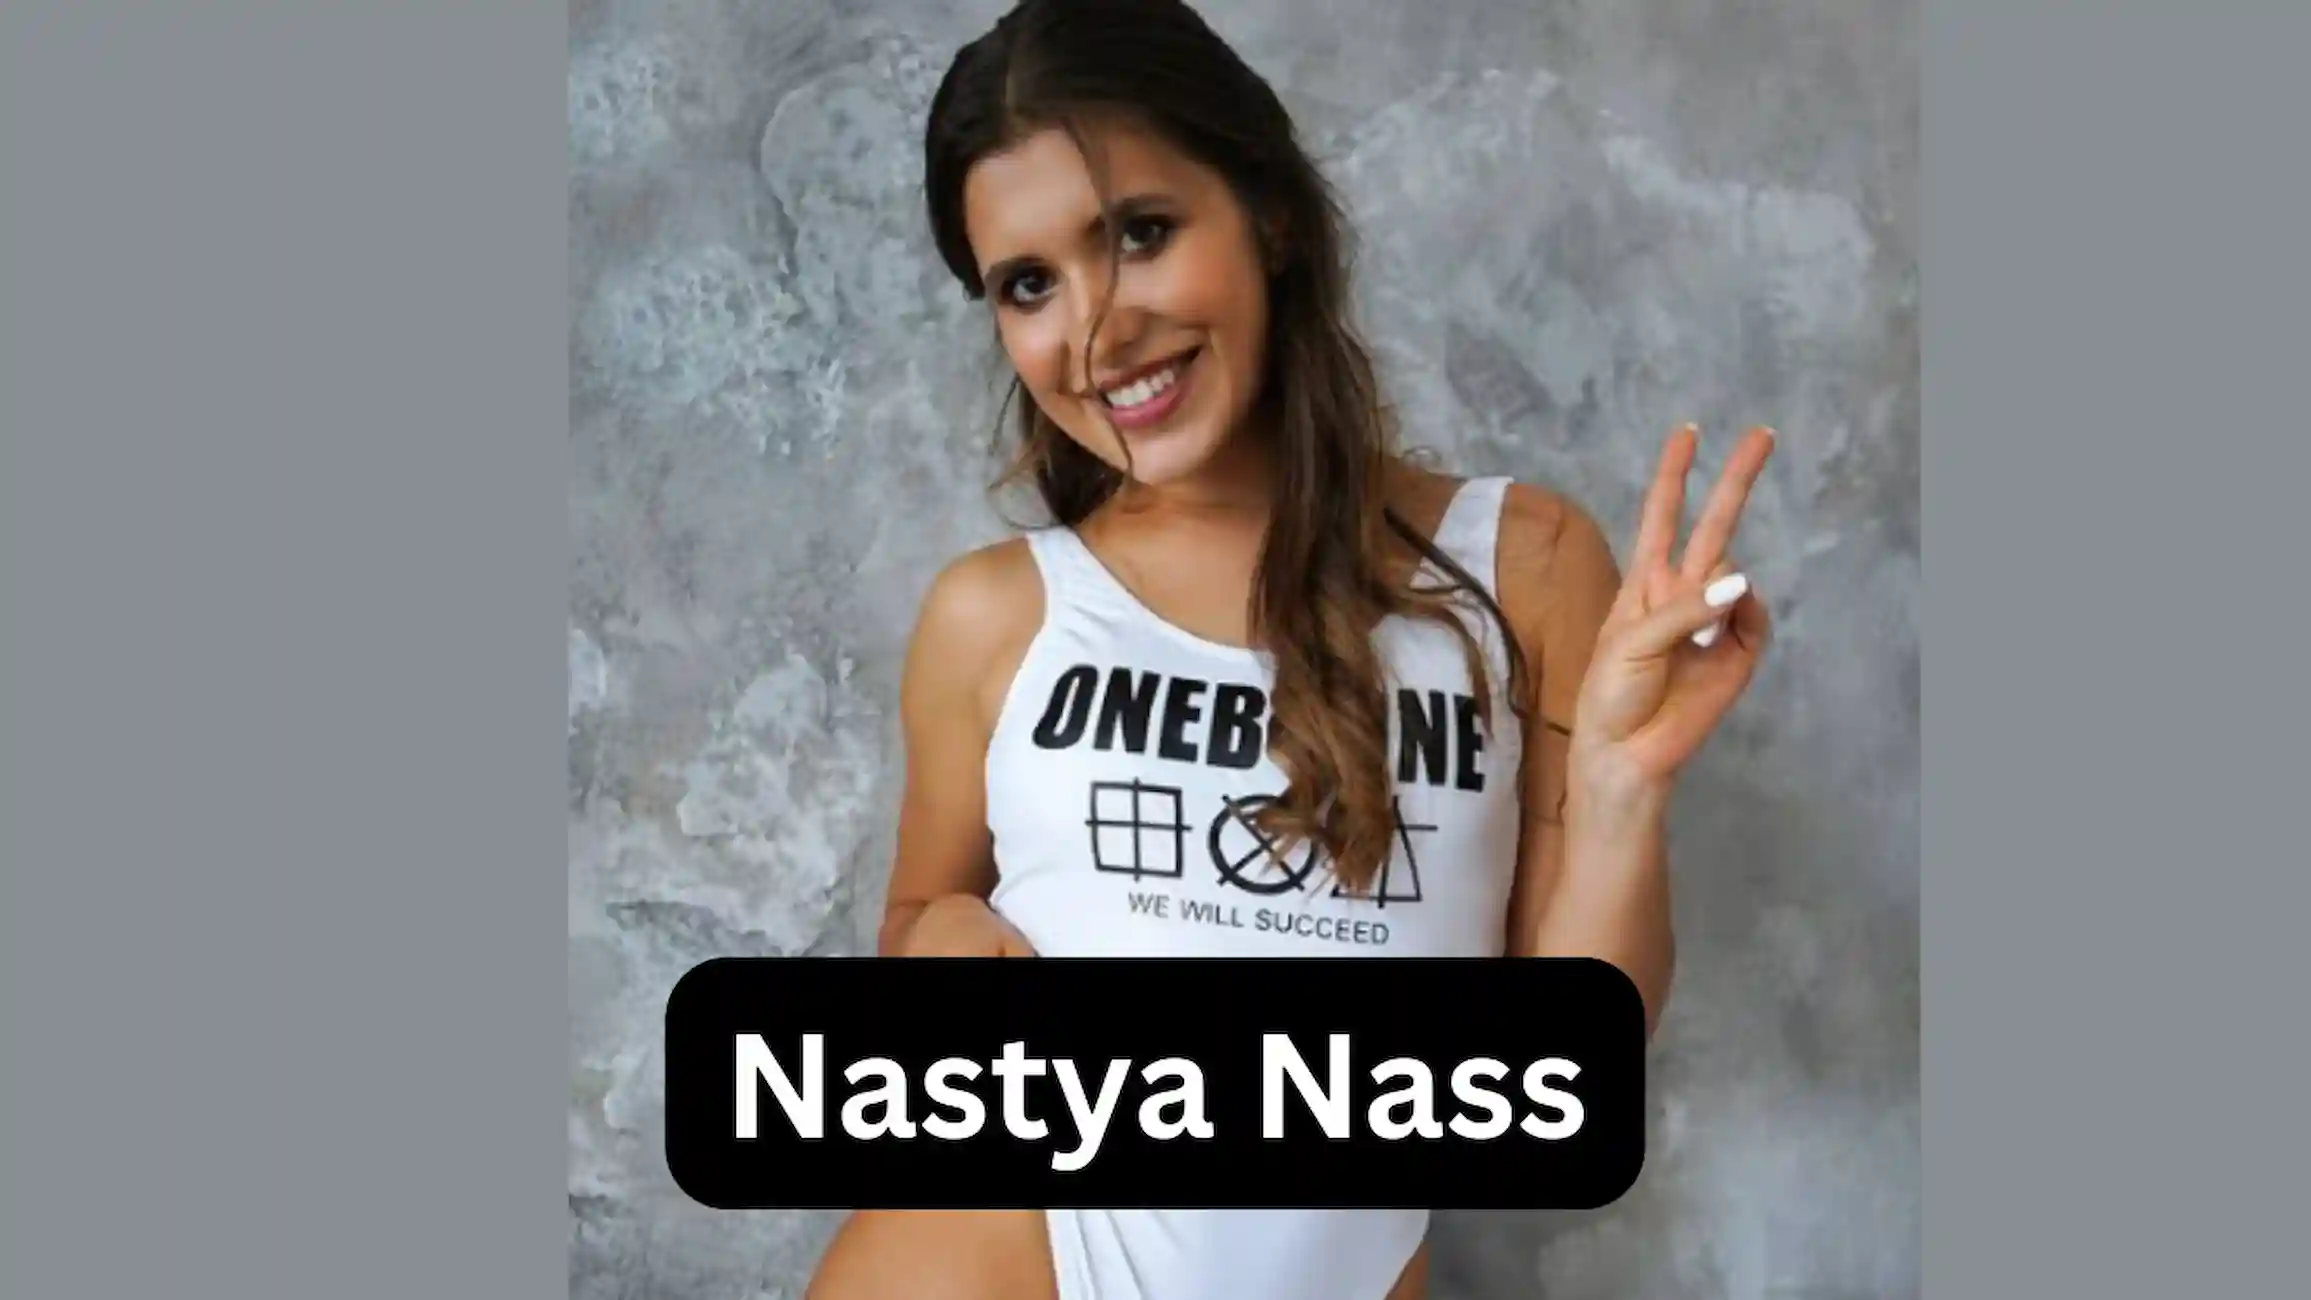 diana katrina recommends how old is nastya nass pic